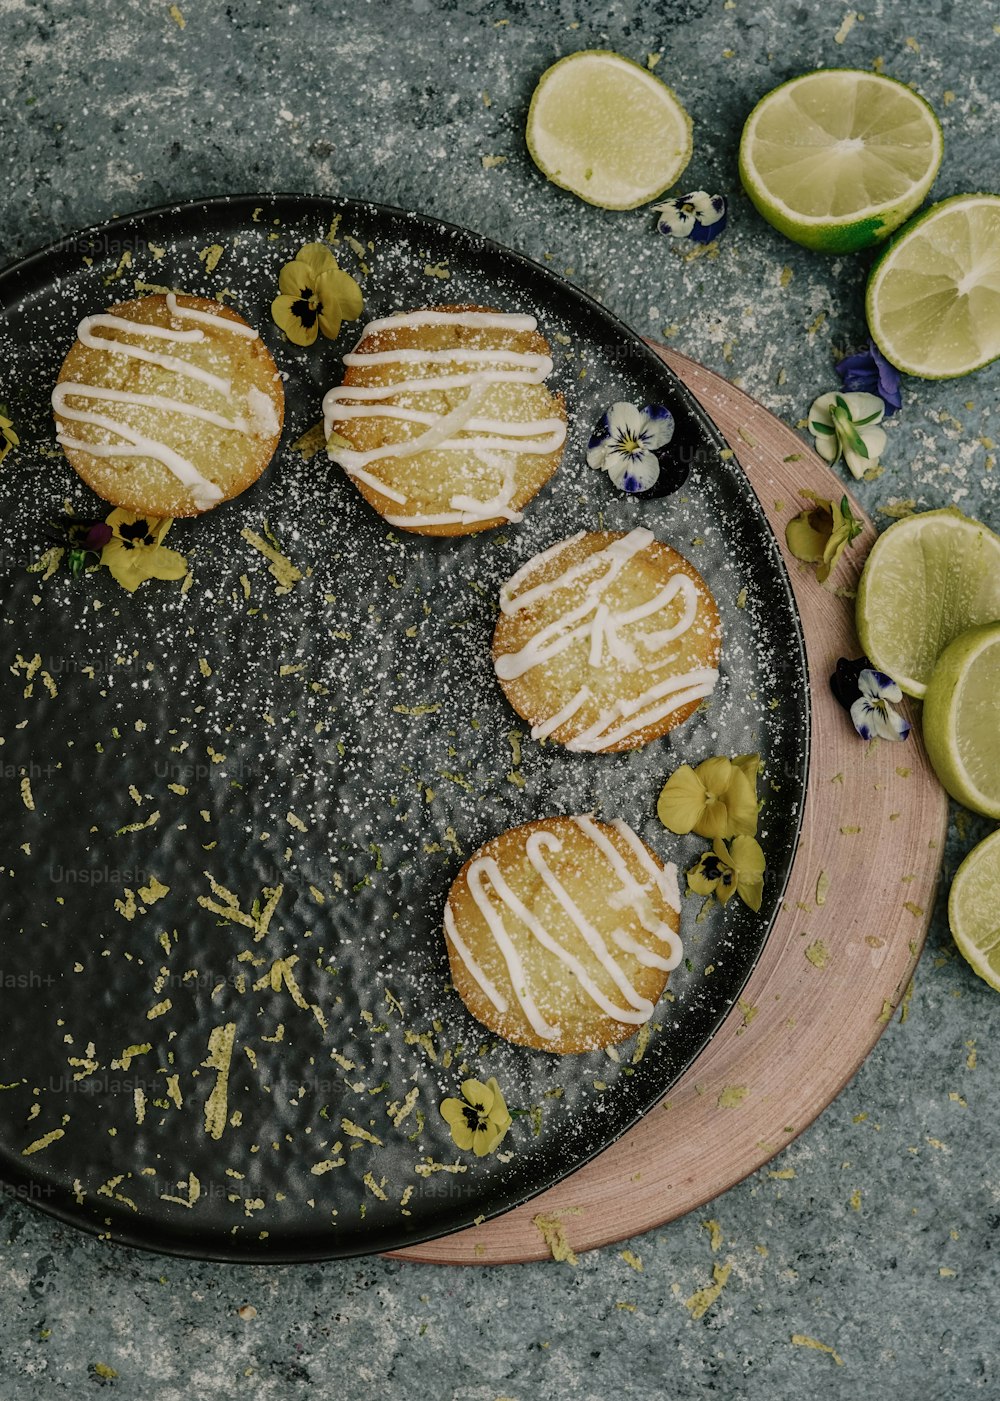 a plate with lemon cookies and limes on it